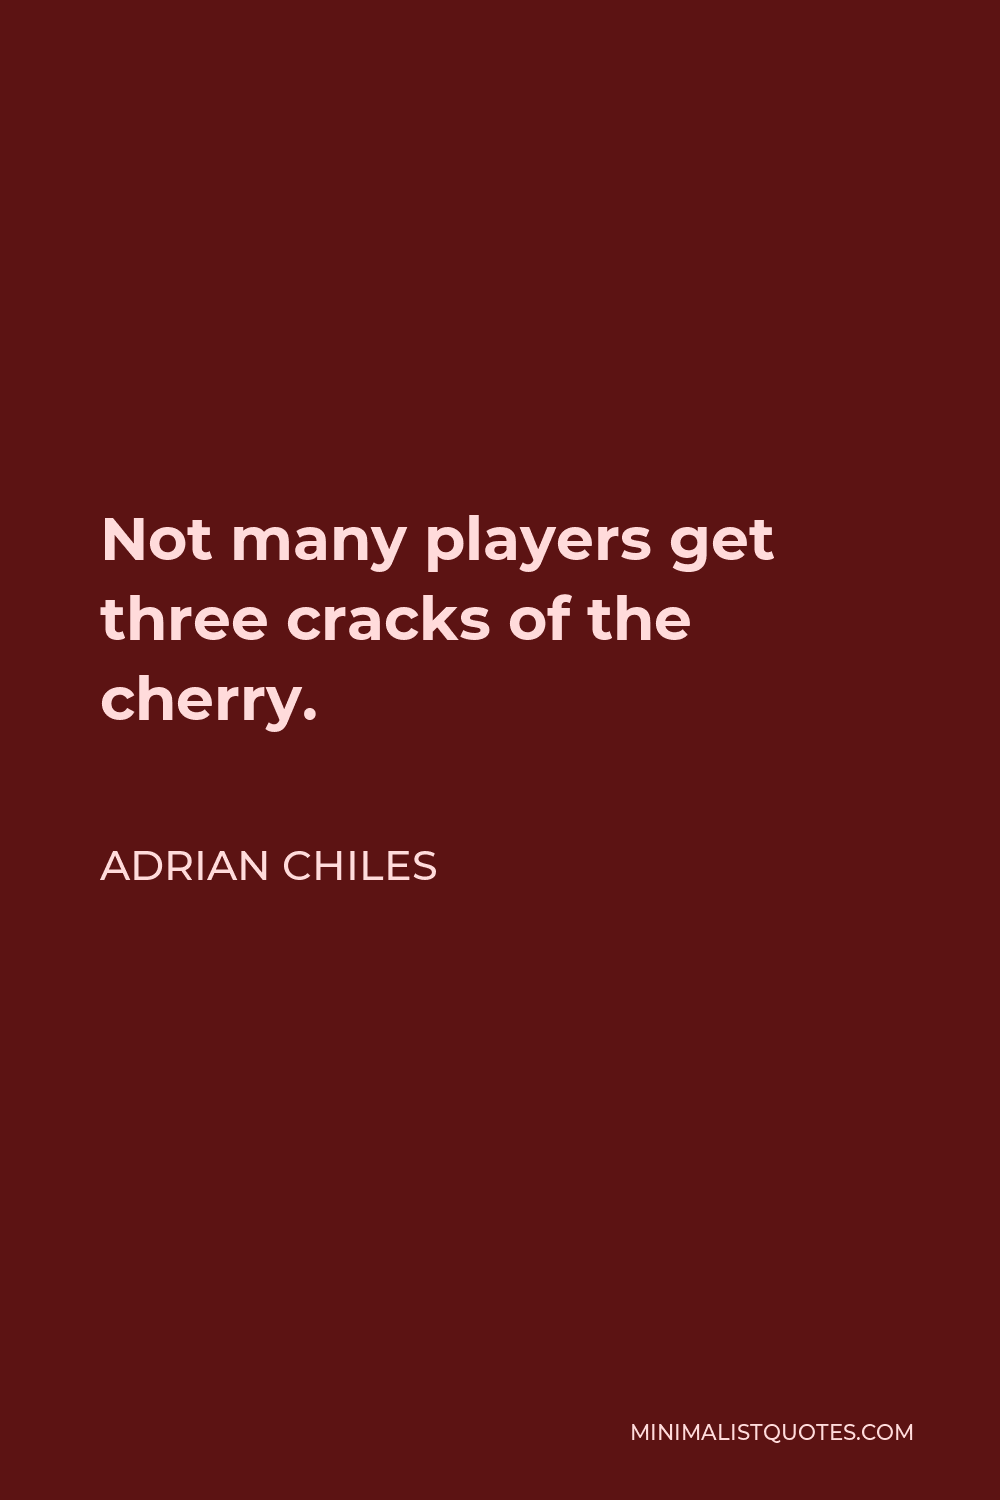 Adrian Chiles Quote - Not many players get three cracks of the cherry.